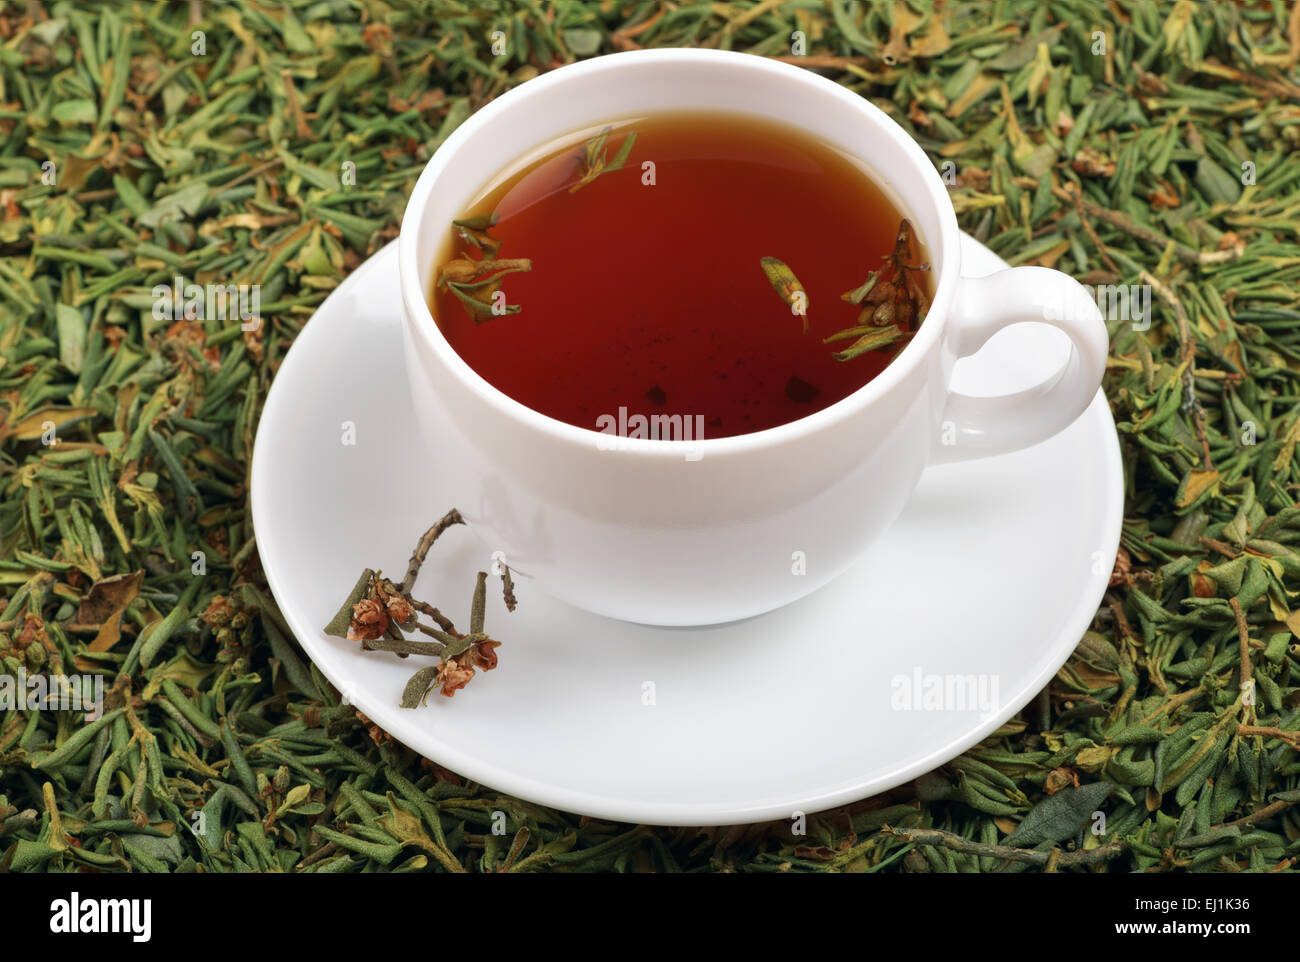 A cup of tea with the addition of herb against the background Rhododendron adamsii Stock Photo